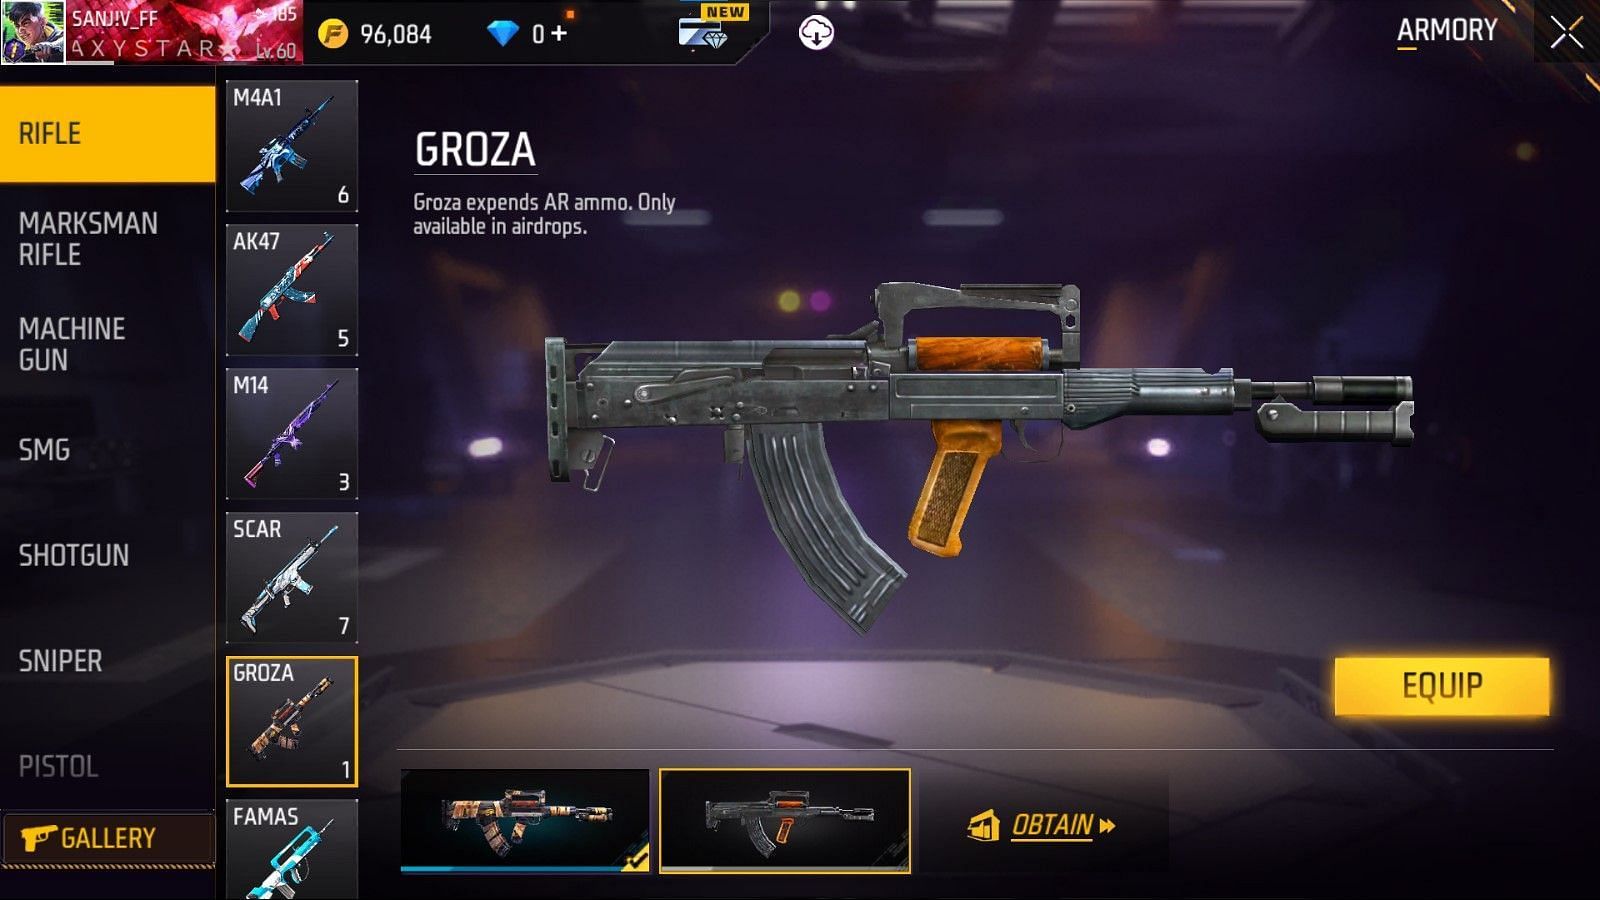 Groza is extensively popular in the community (Image via Garena)